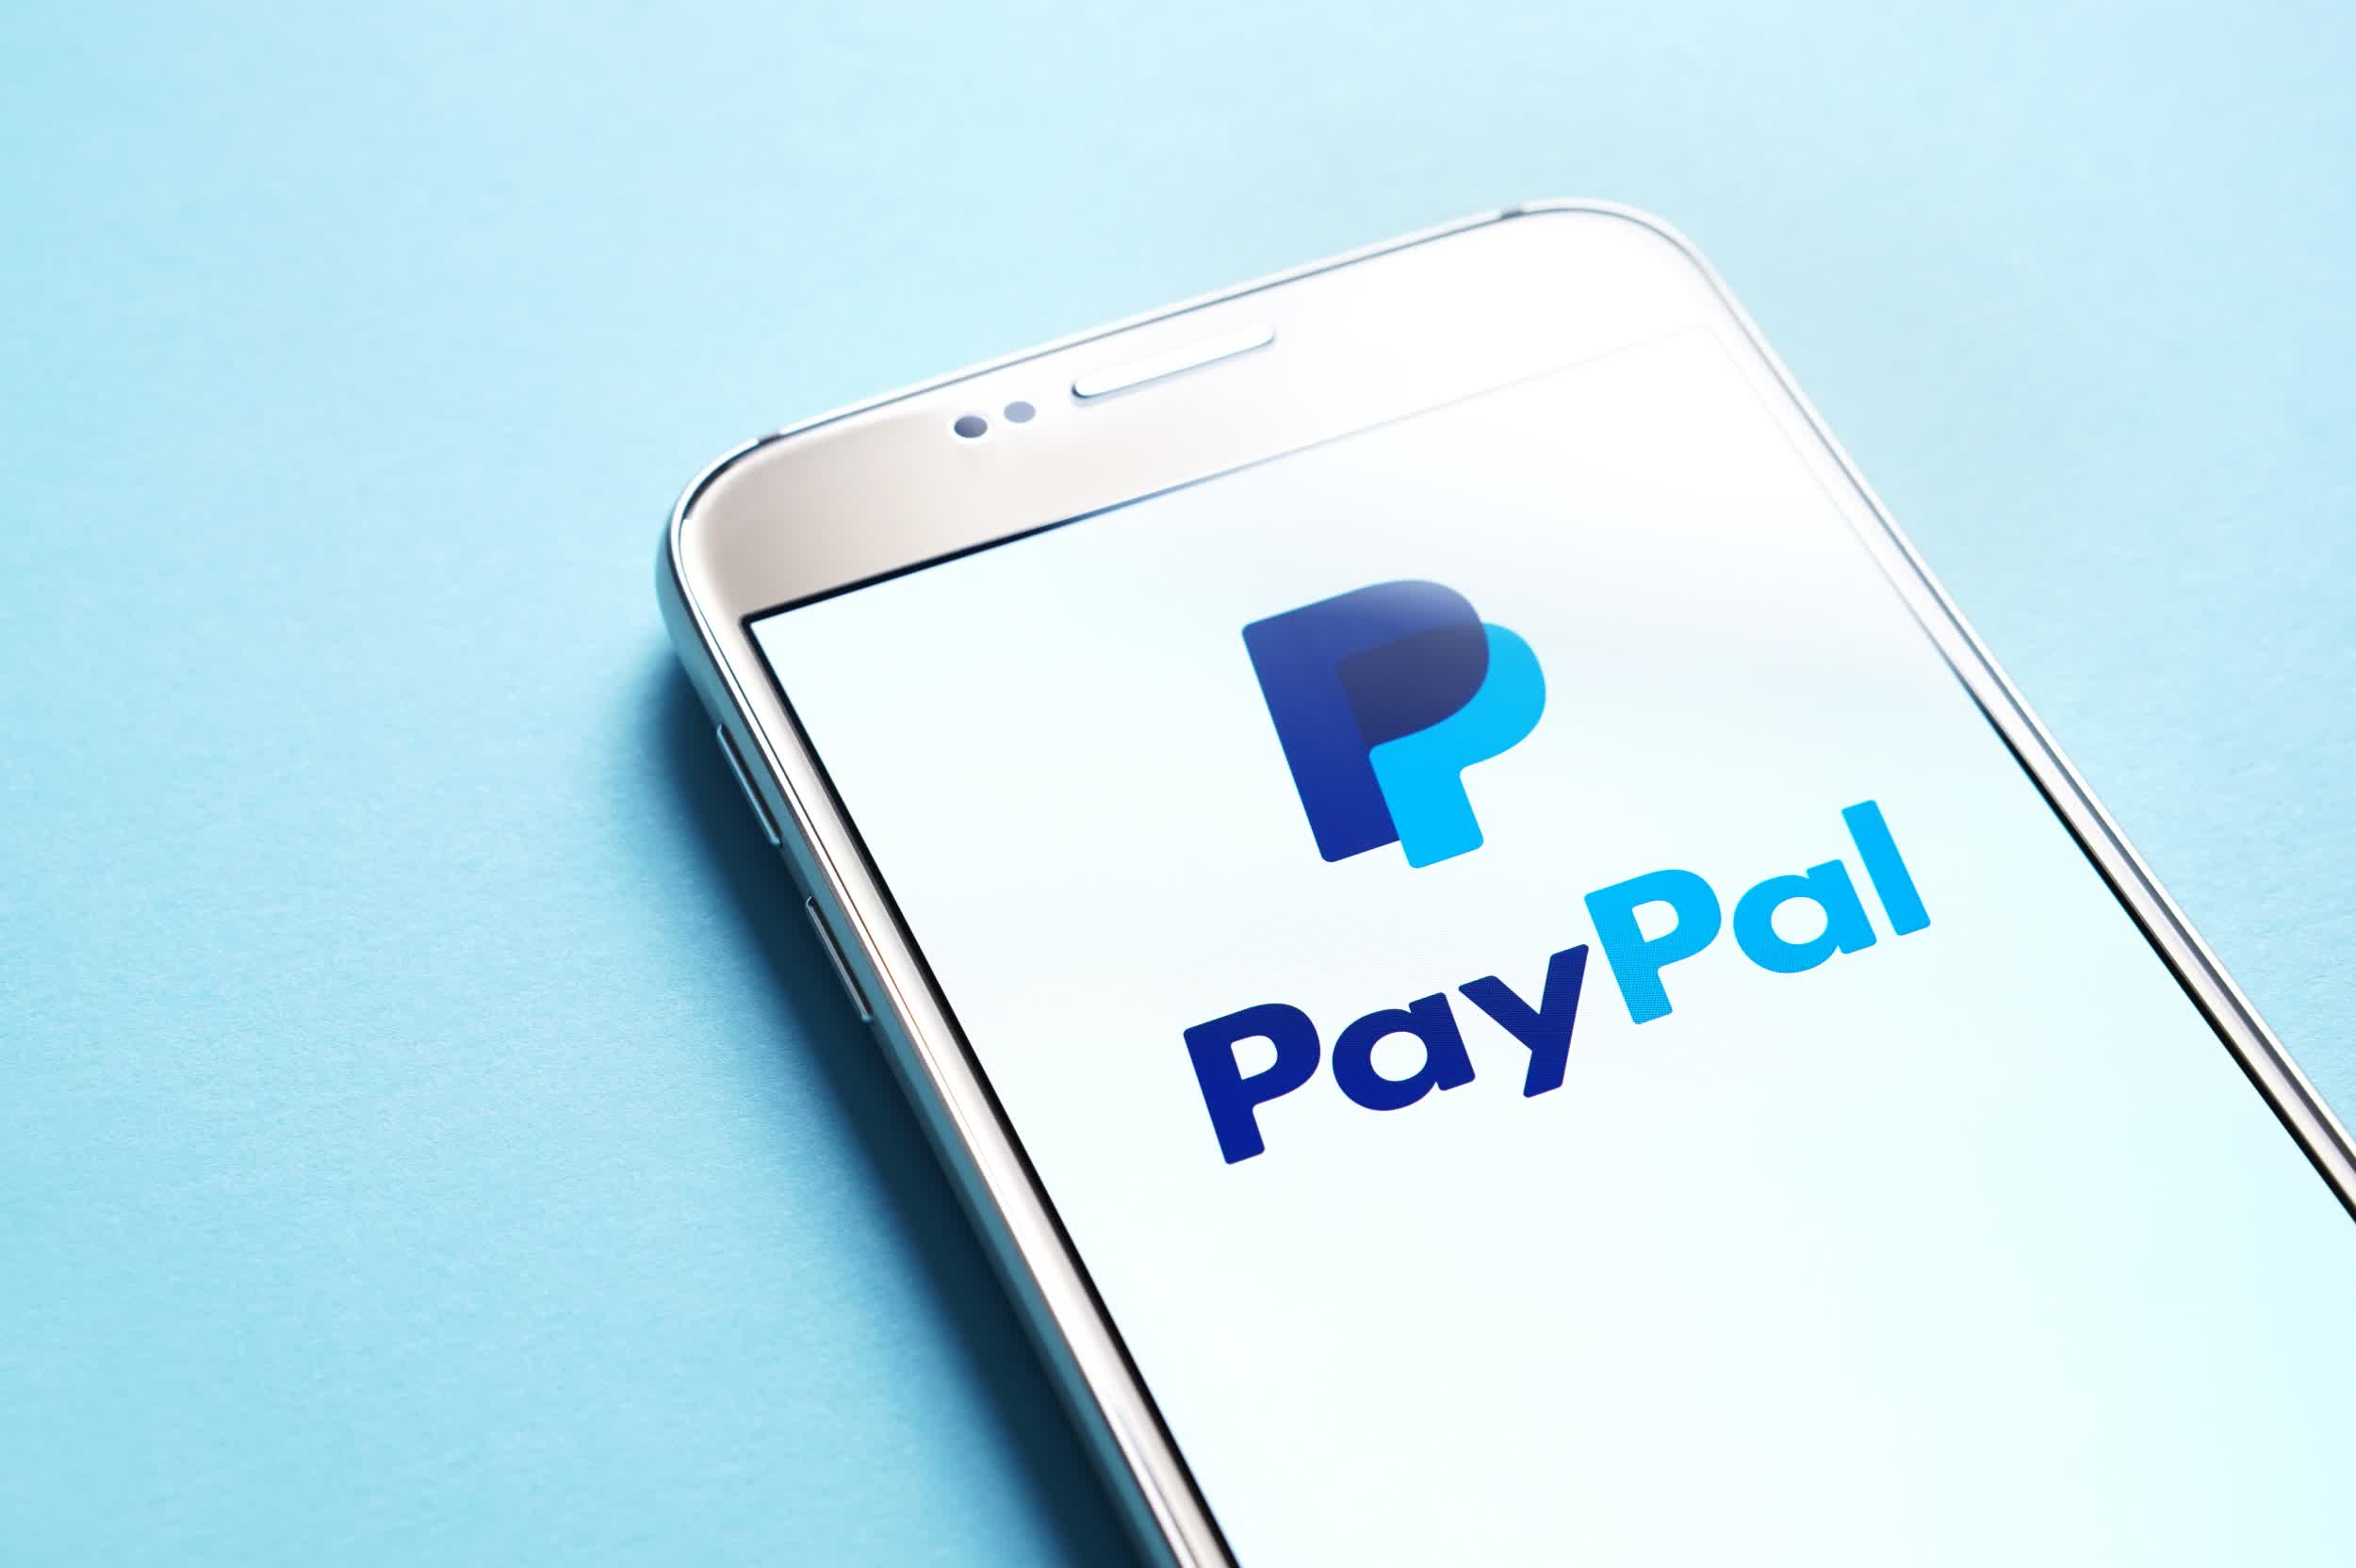 PayPal has strong Q3 as consumers increasingly turn to the Internet during pandemic